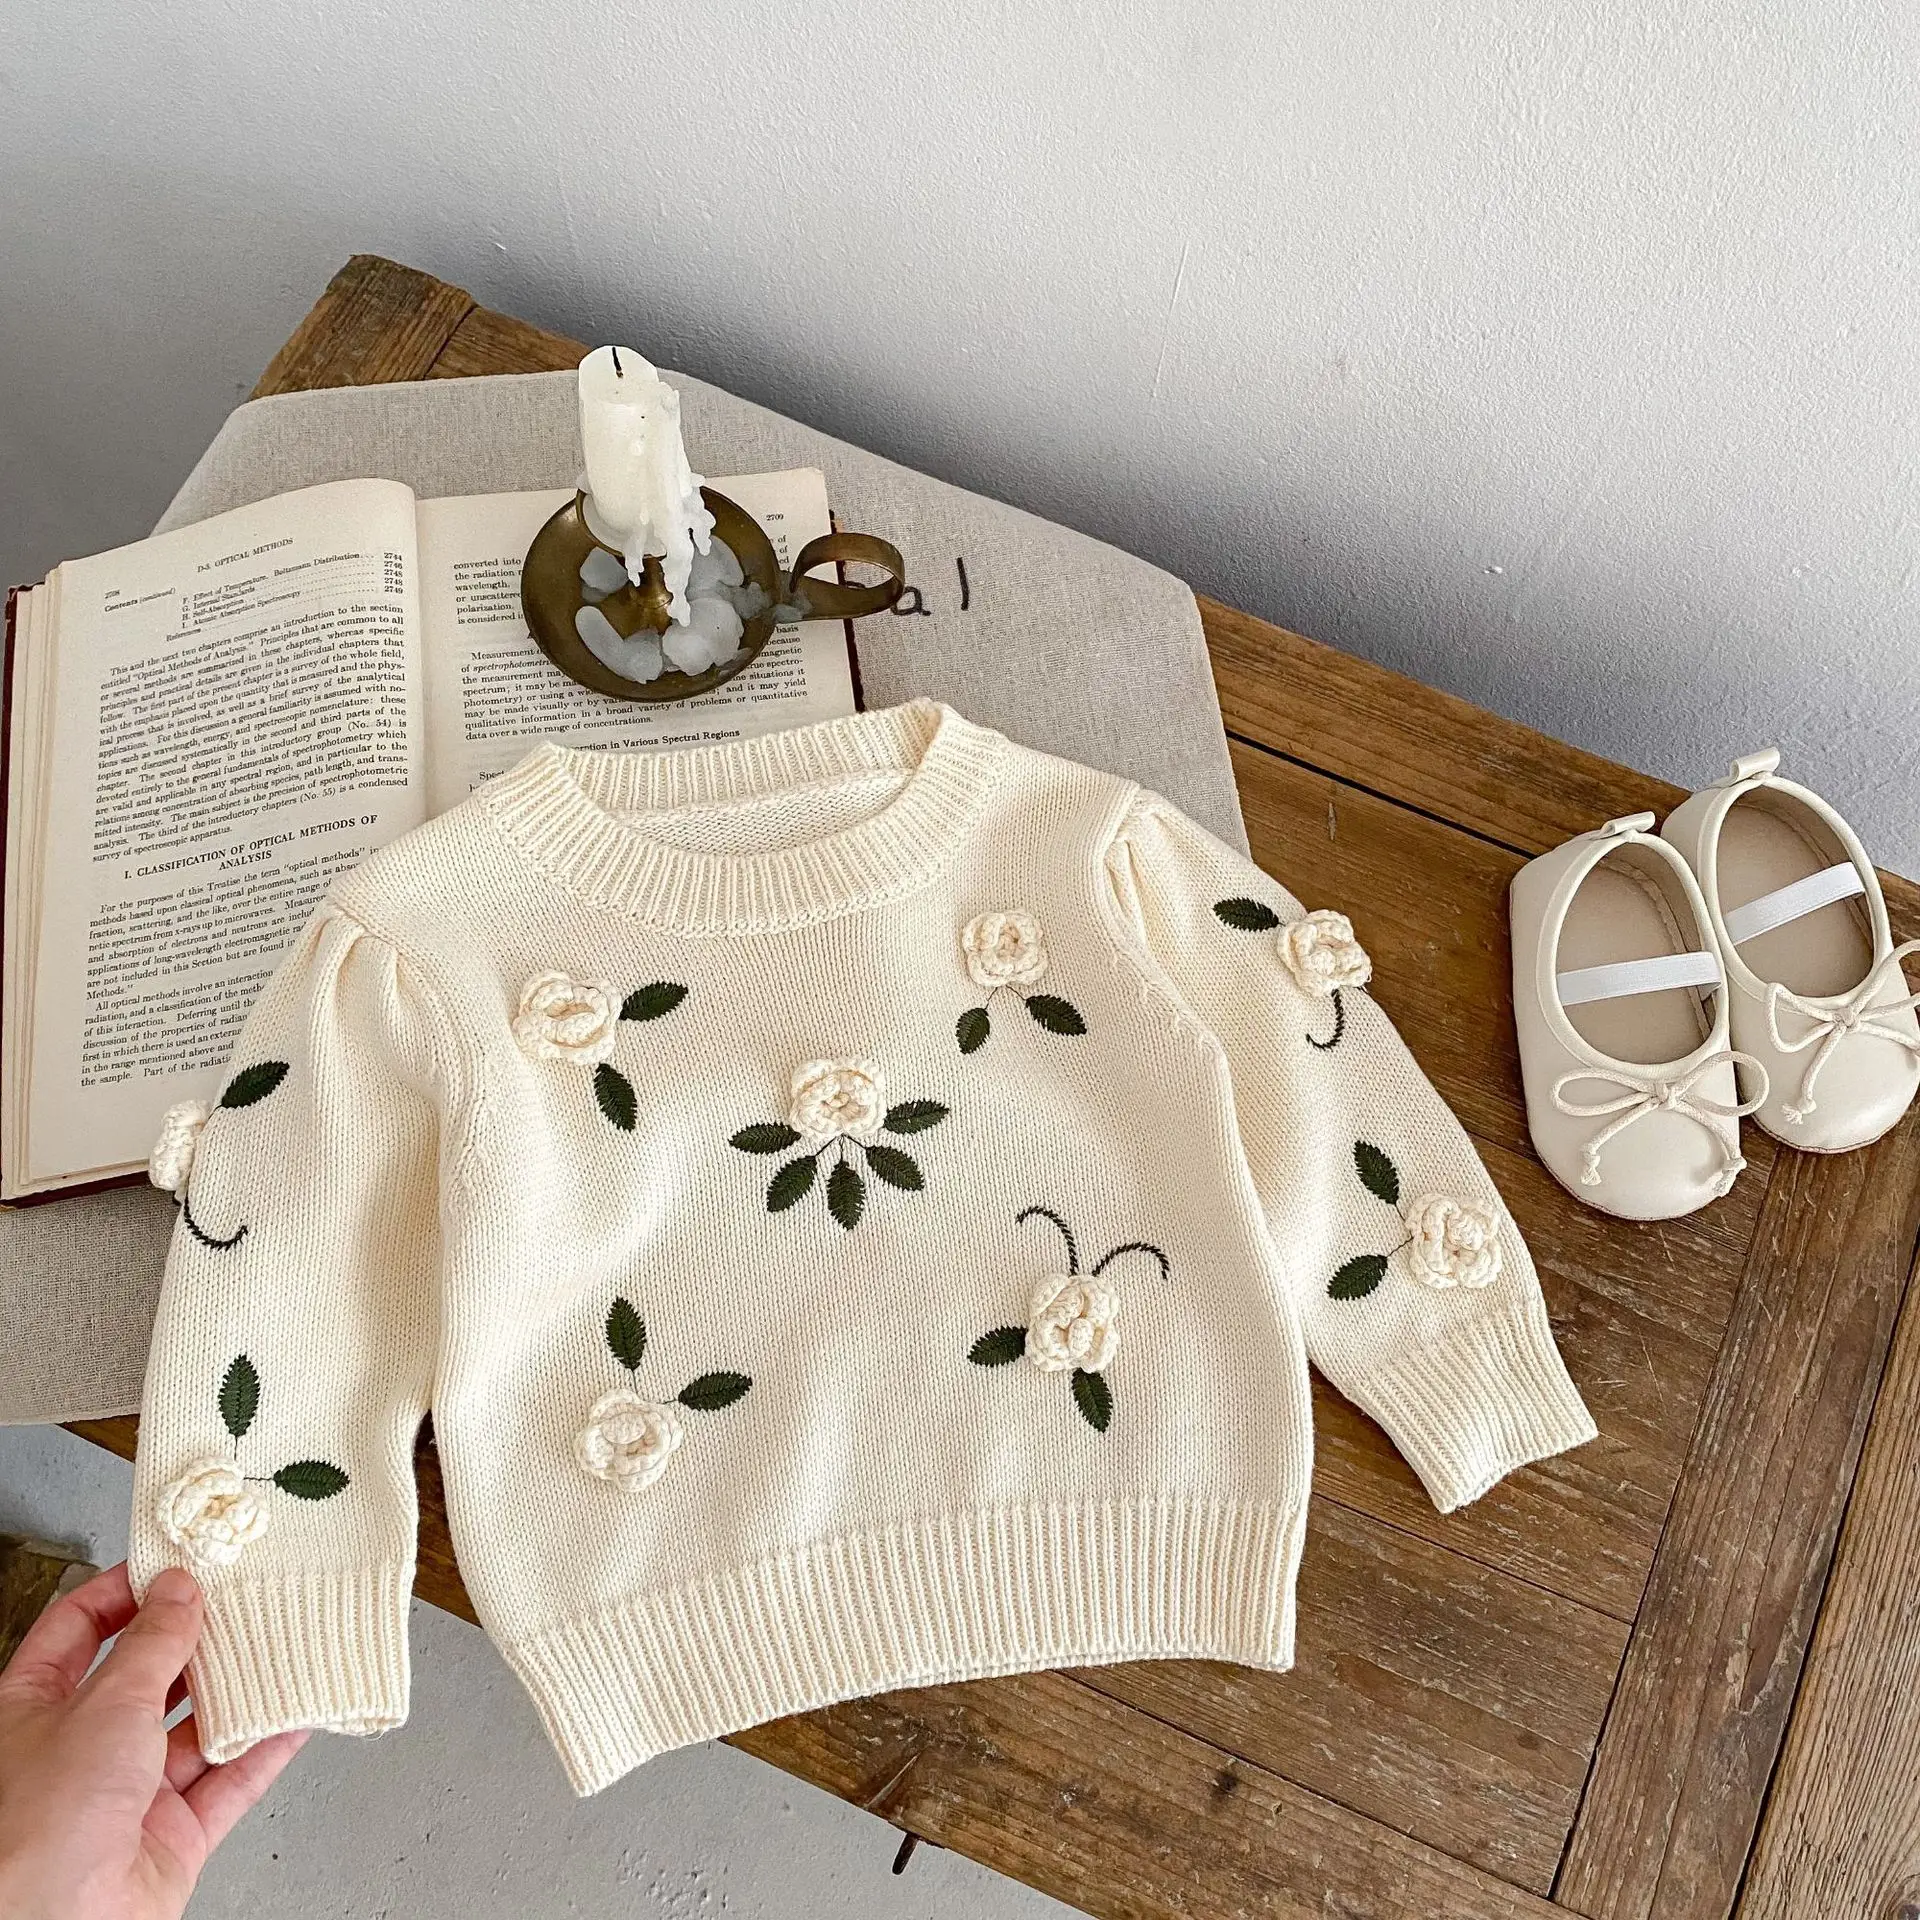 

Autumn Baby Girls Sweaters Winter White Long Sleeve Knitted Newborn Infant Cotton Pullovers Jumper 0-2Y Toddler Knitwear Clothes